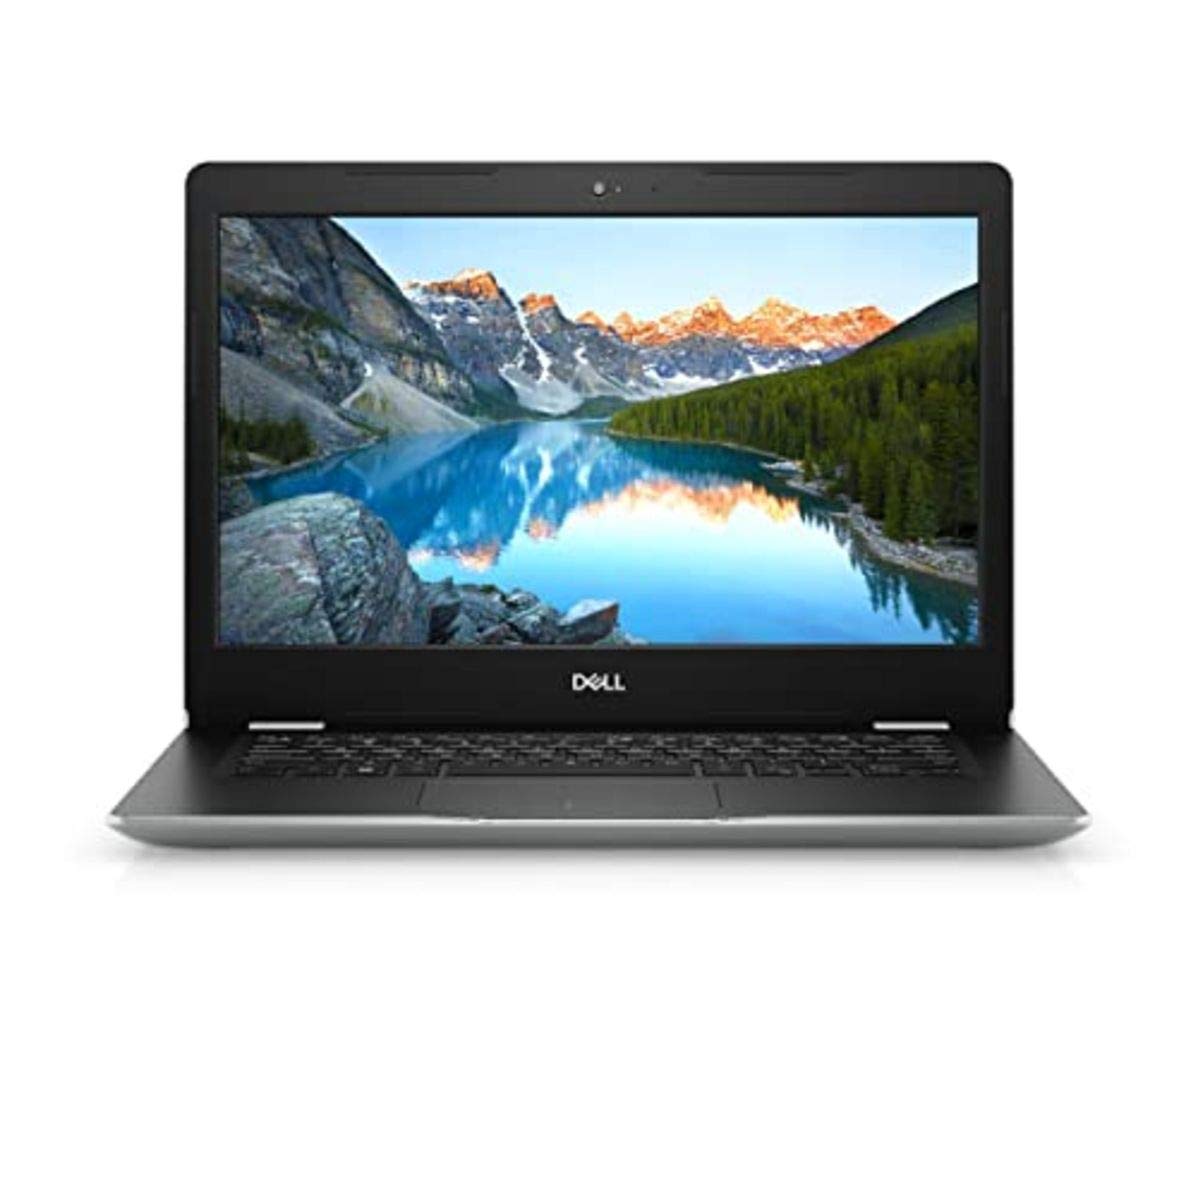 Dell Inspiron 3493 15.6"-inch FHD Thin & Light Laptop /10th Gen i3-1005G1/4GB/256GB SSD/Win 10 + MS Office/Integrated Graphics/Platinum Silver